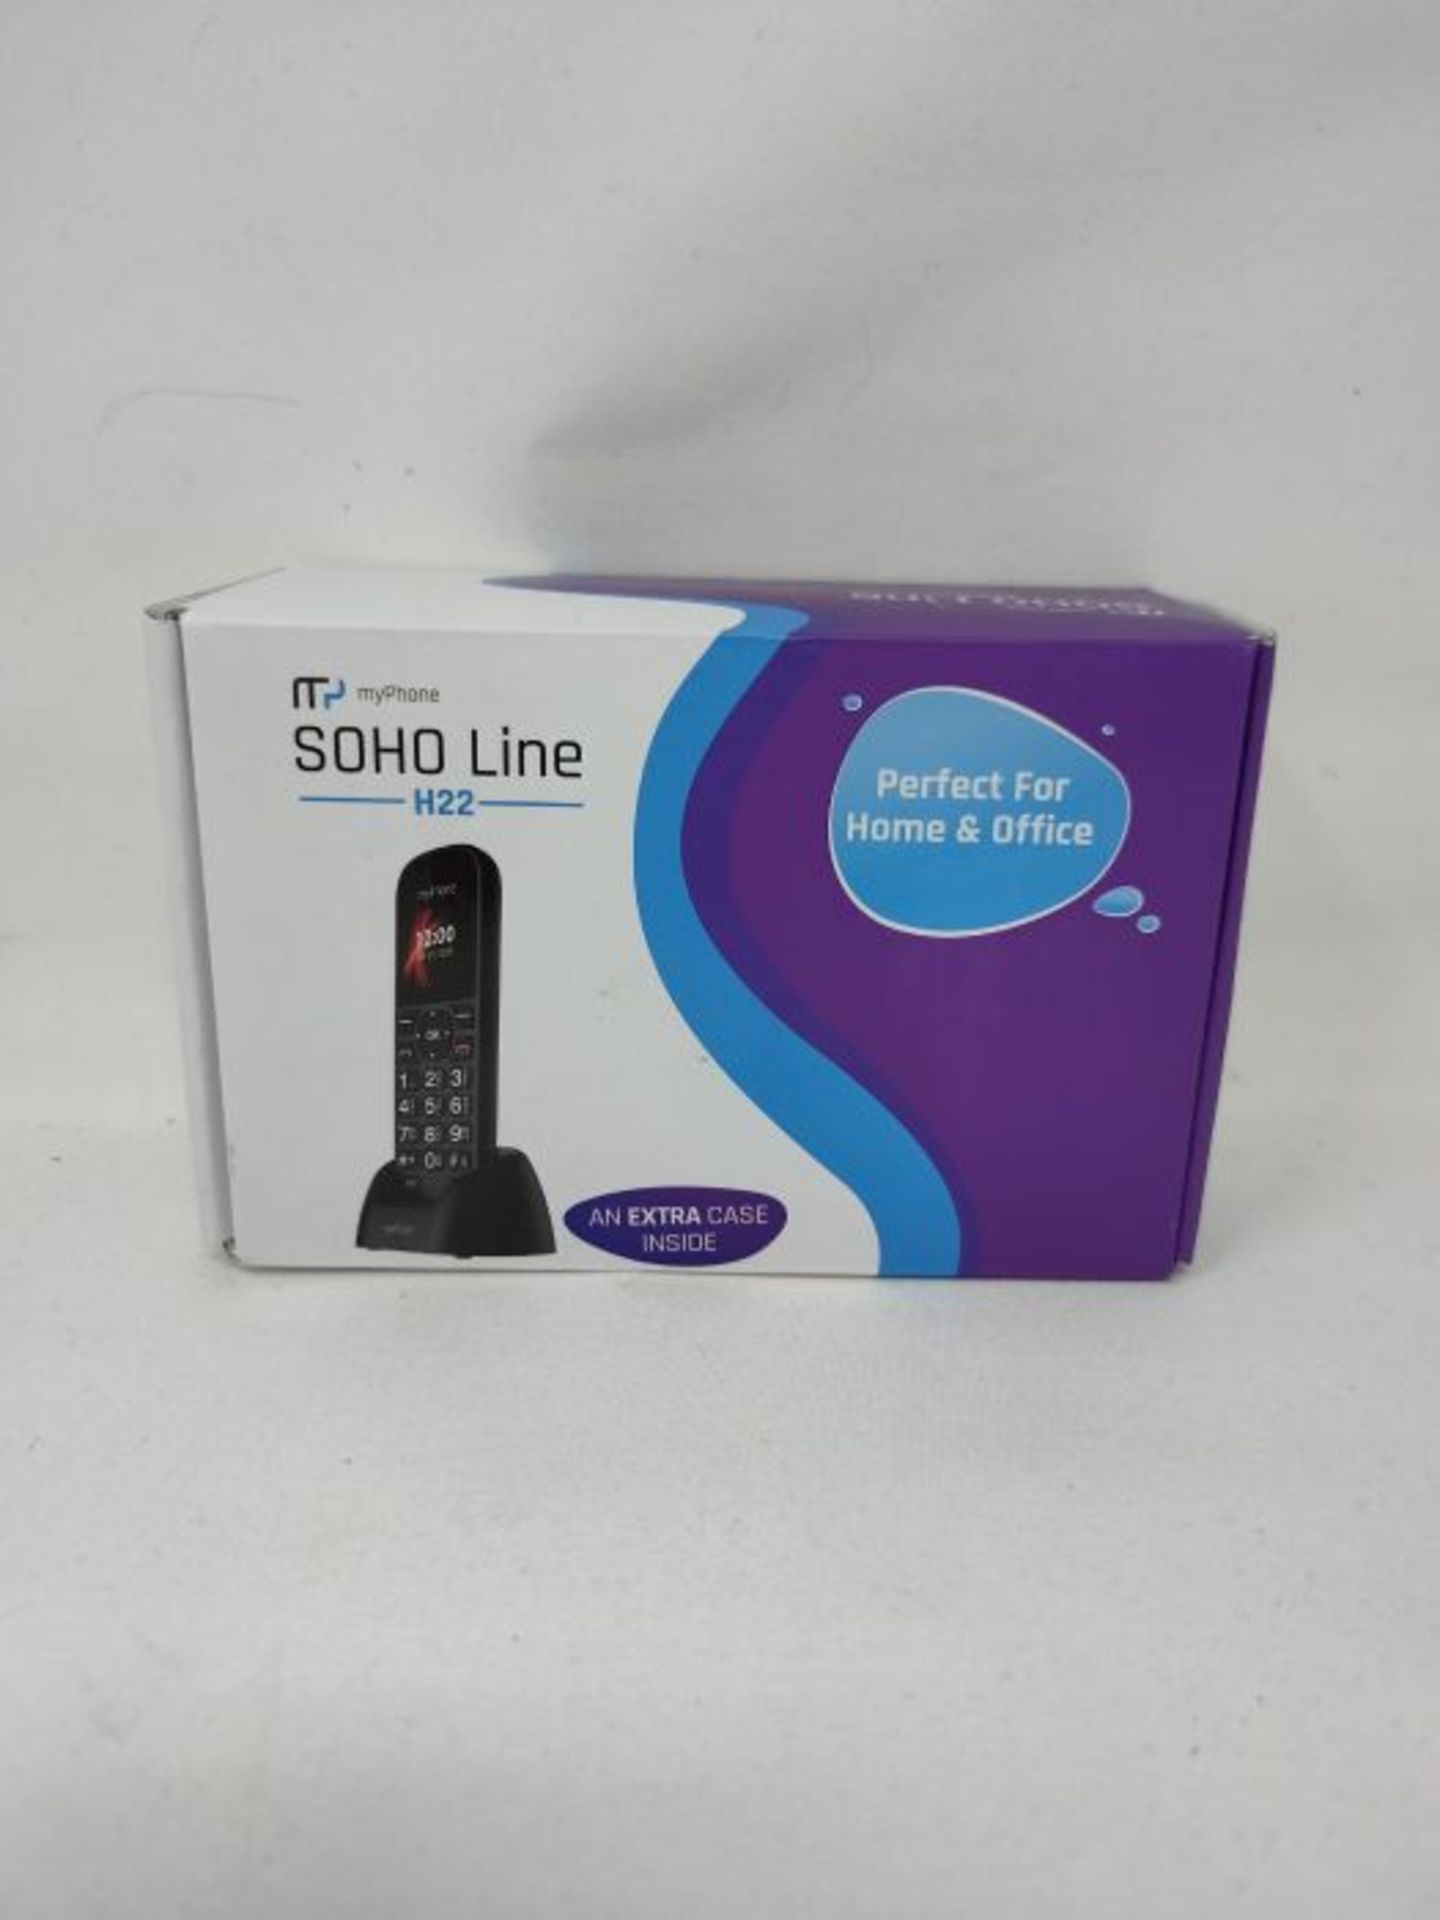 myPhone SOHO Line H22 GSM Desk Phone for Office and Home with Colour Display, Hands-Fr - Image 4 of 4